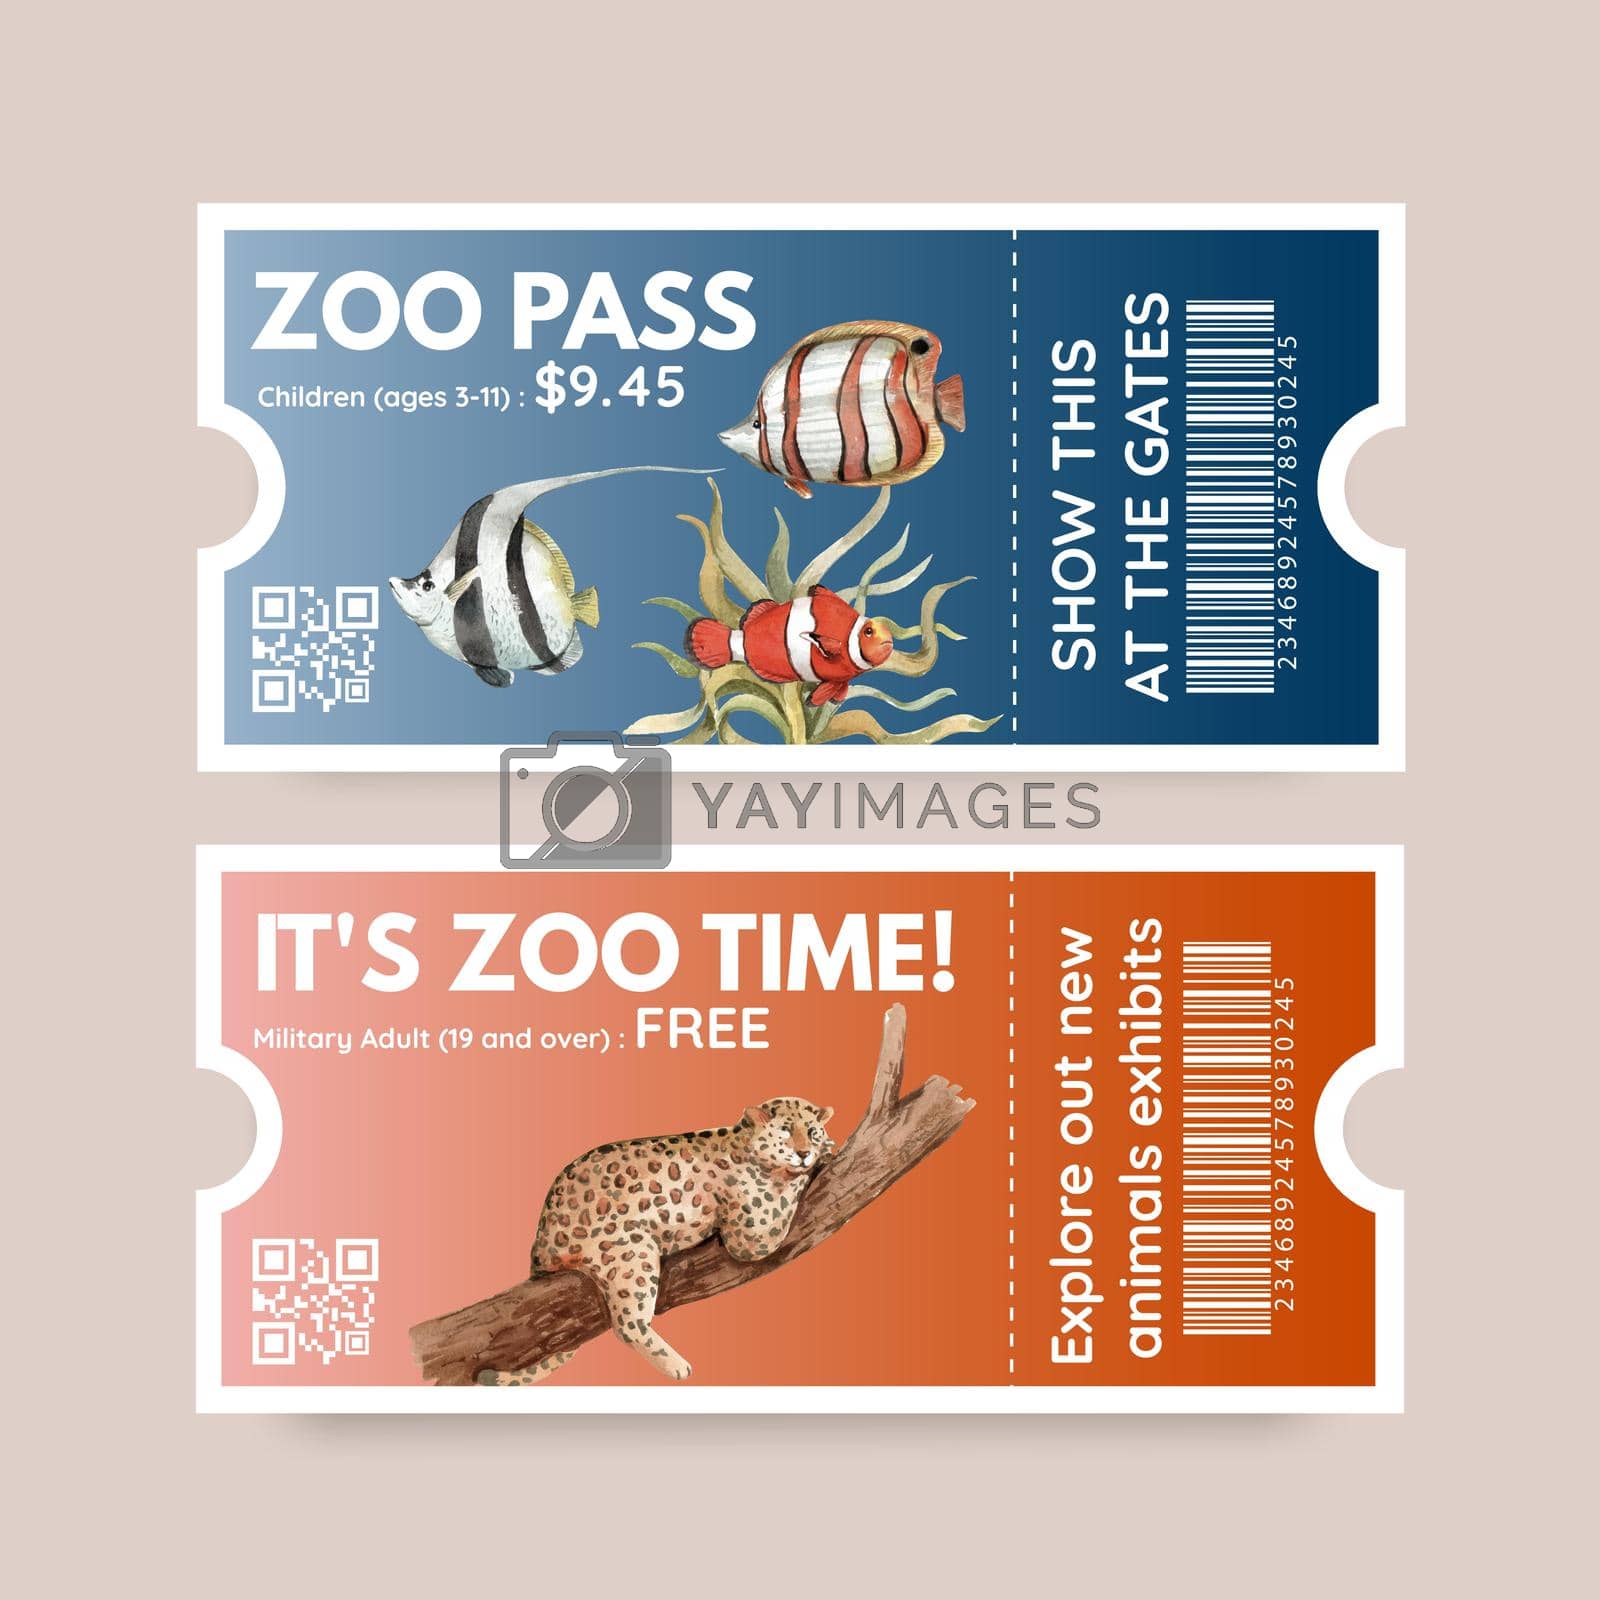 Royalty free image of Ticket template with biodiversity as natural wildlife species or fauna protection concept,watercolor style by Photographeeasia